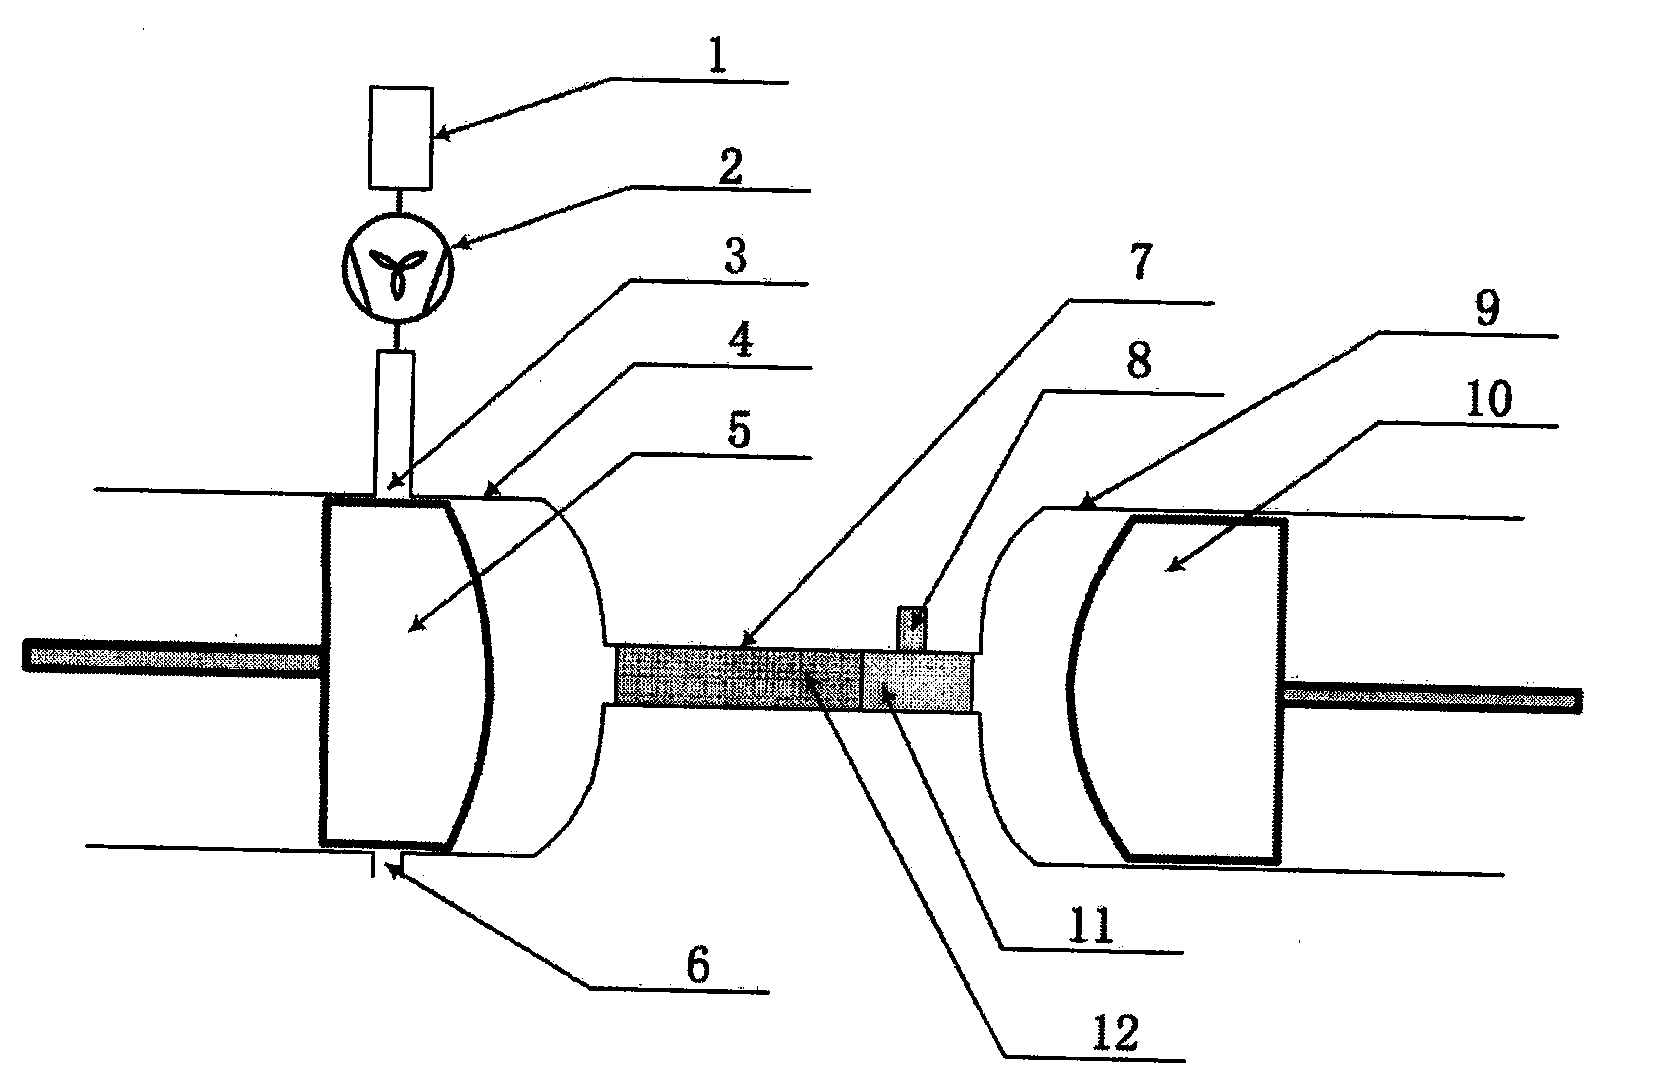 Reciprocating heat accumulating type internal combustion engine using scavenging pump for auxiliary intake and exhaust